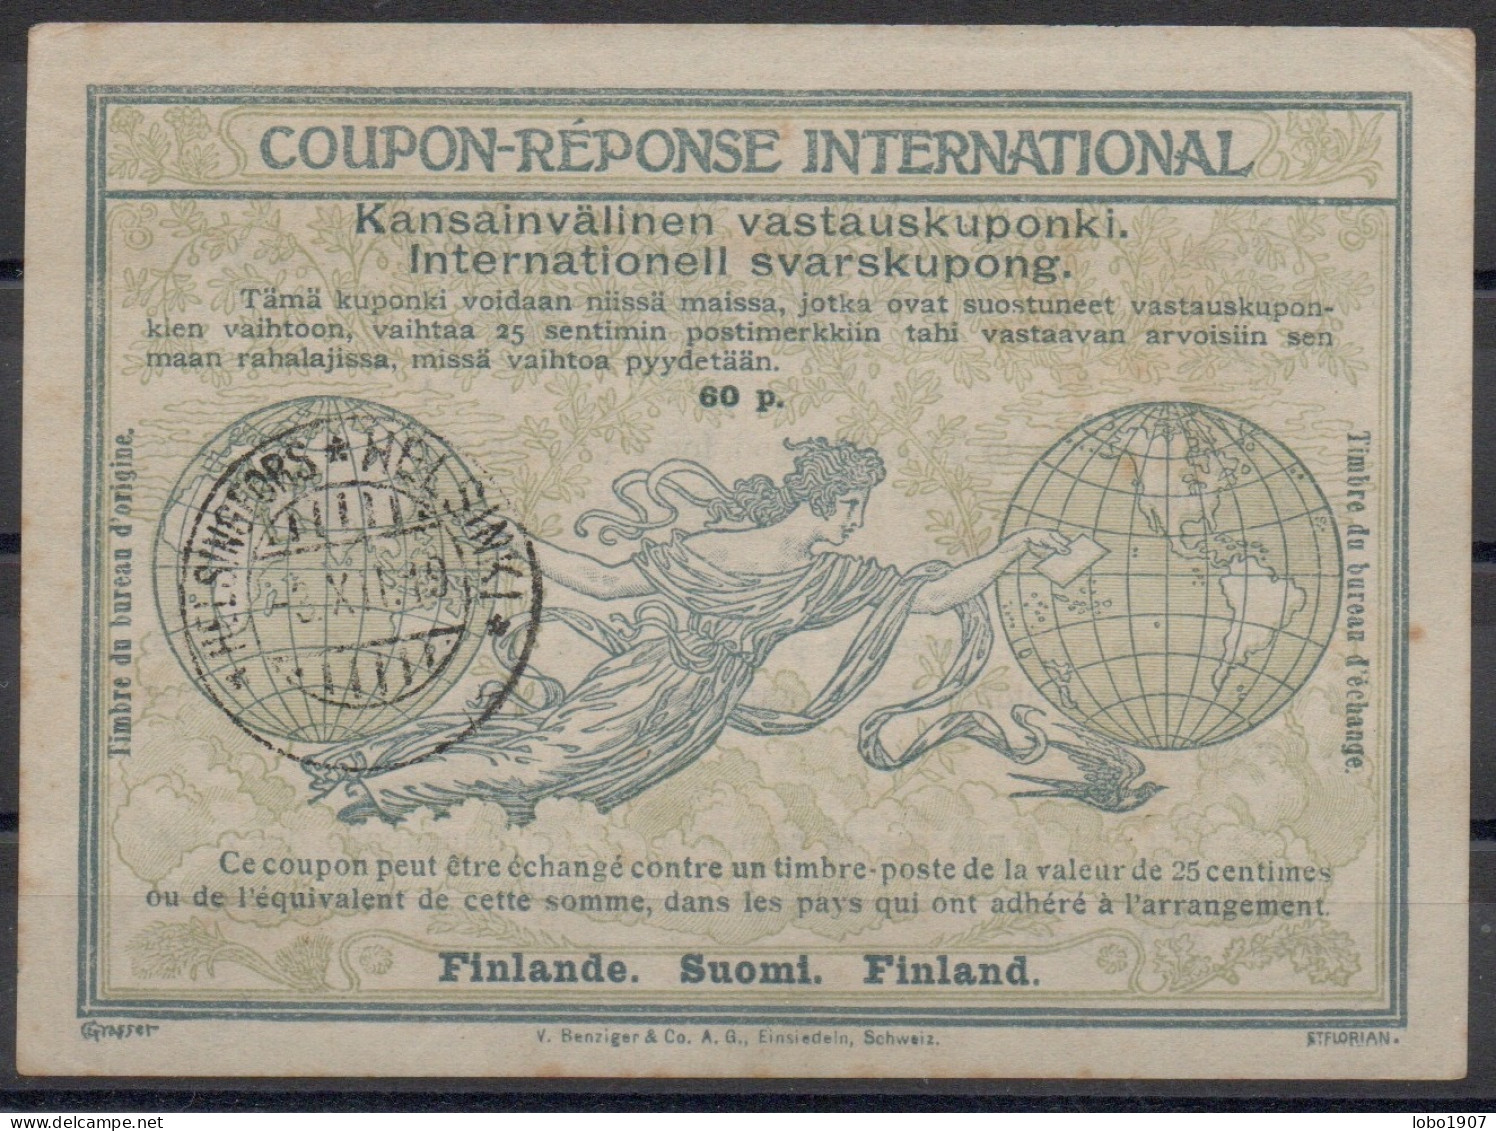 FINLAND FINLANDE 1919  Ro4  60p  First International Reply Coupon Reponse Antwortschein IRC IAS  HELSINGFORS 03.12.1919 - Entiers Postaux